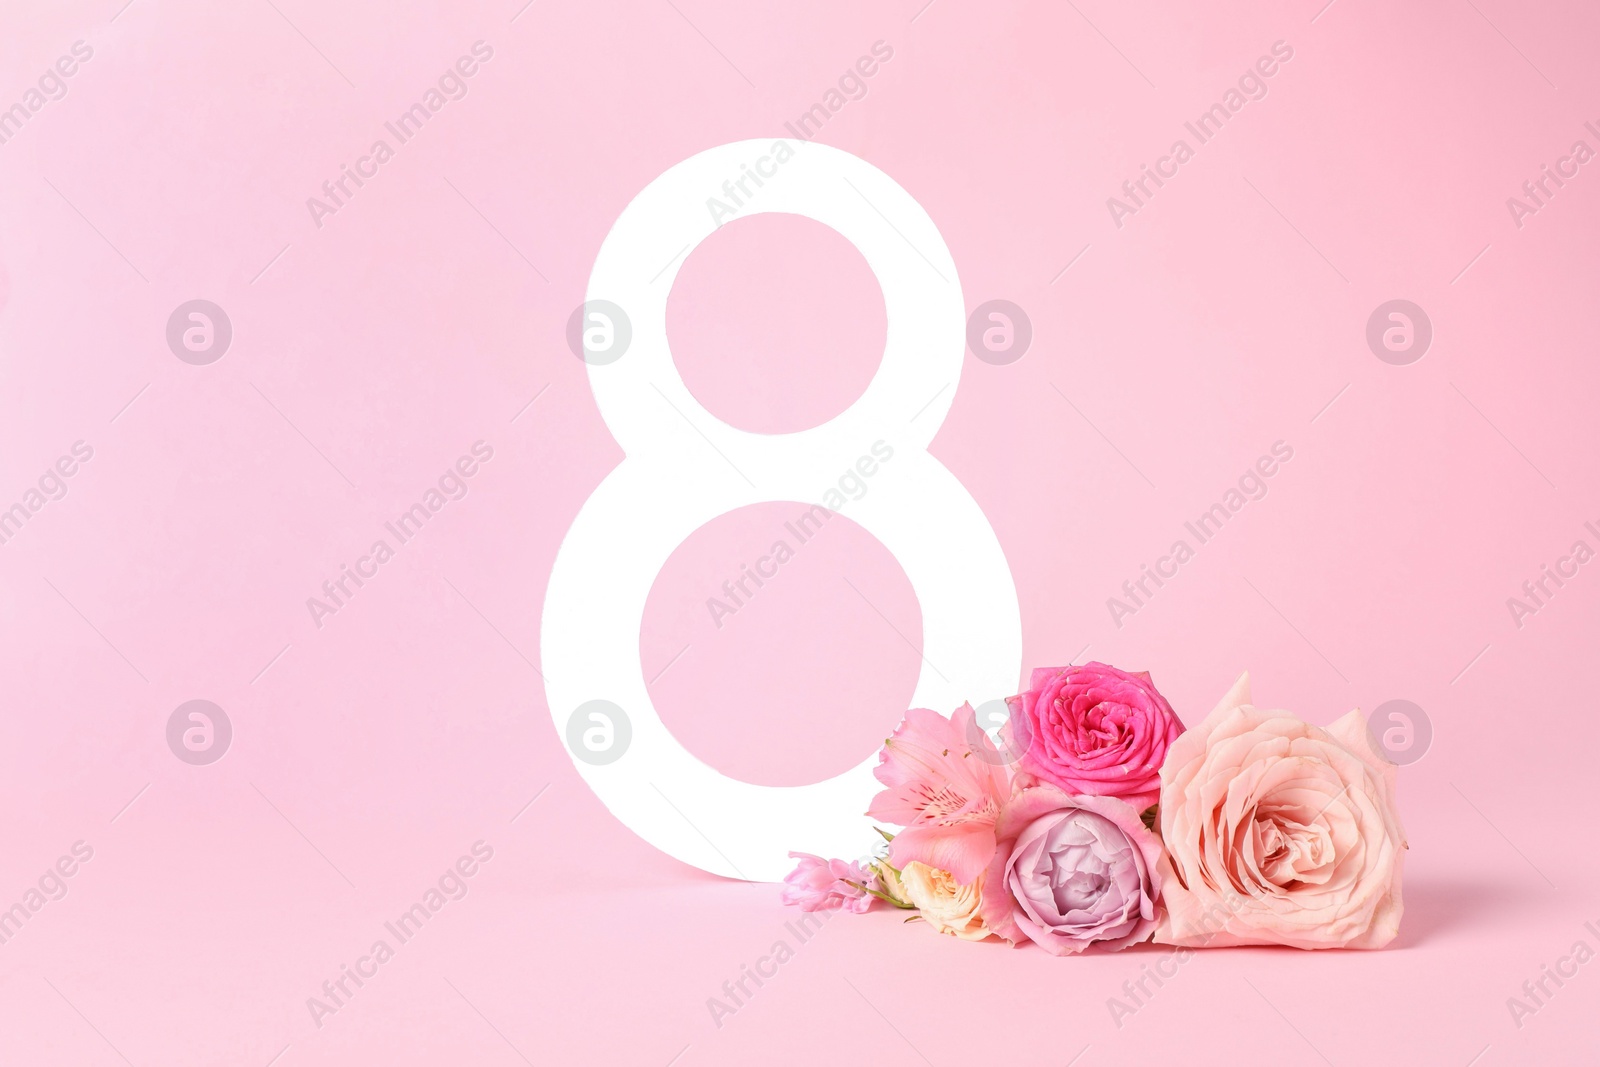 Photo of 8 March greeting card design with beautiful flowers on light pink background